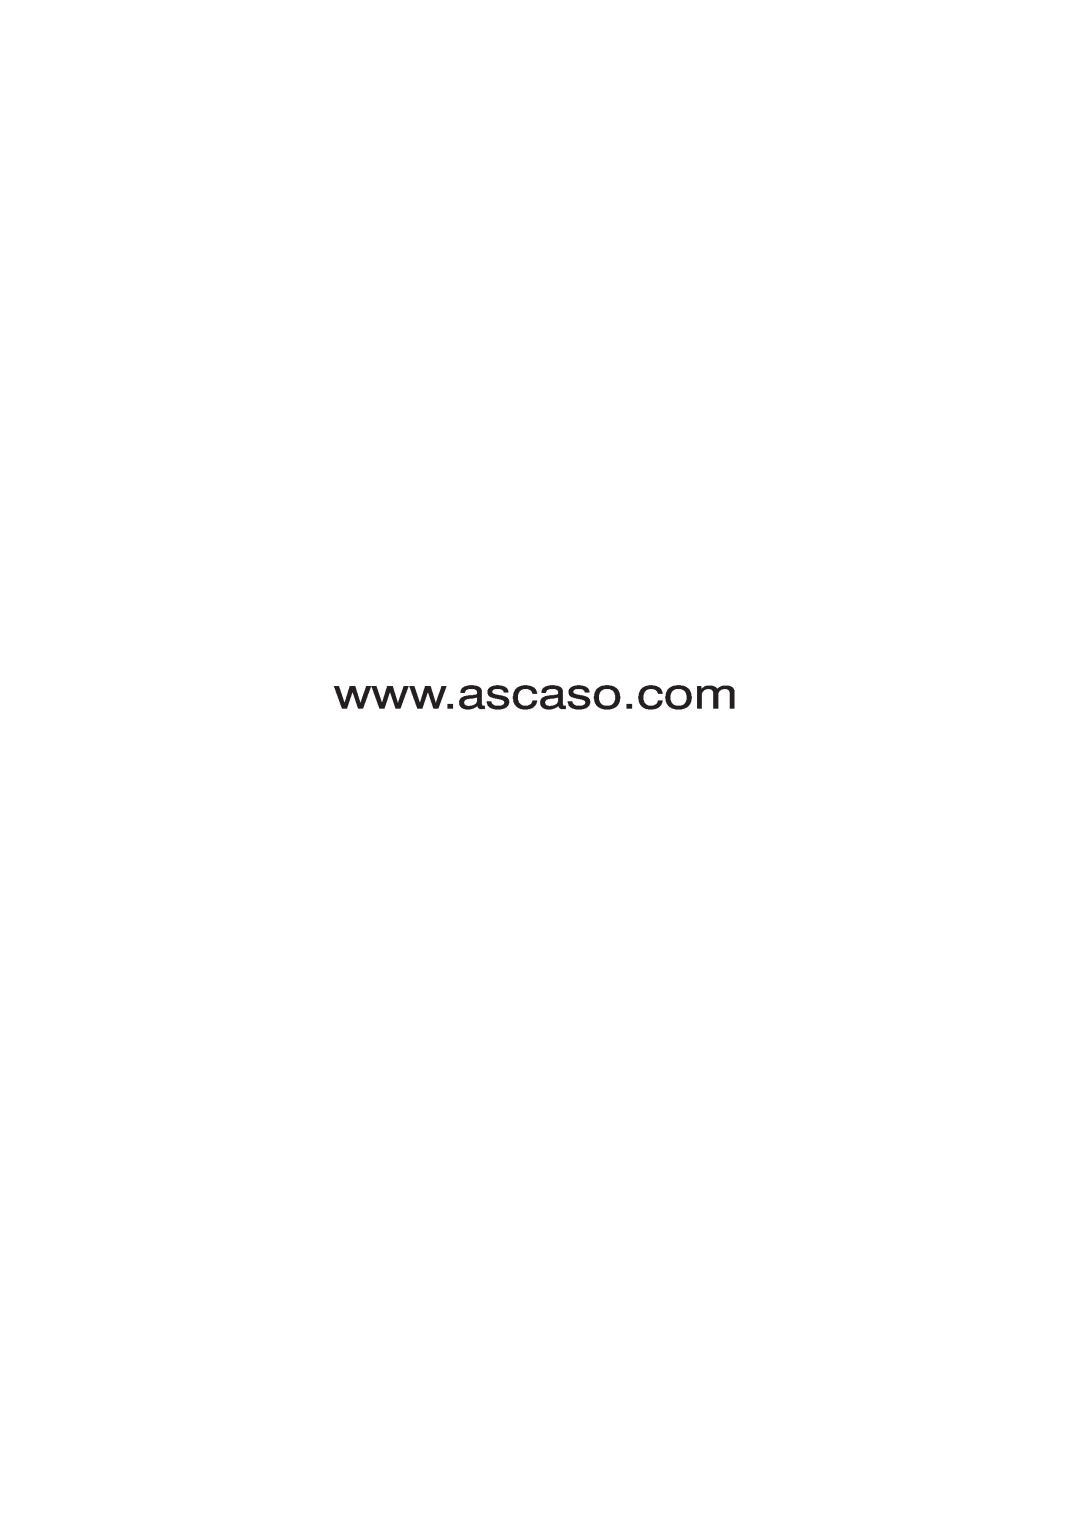 Ascaso Factory Professional System user manual 